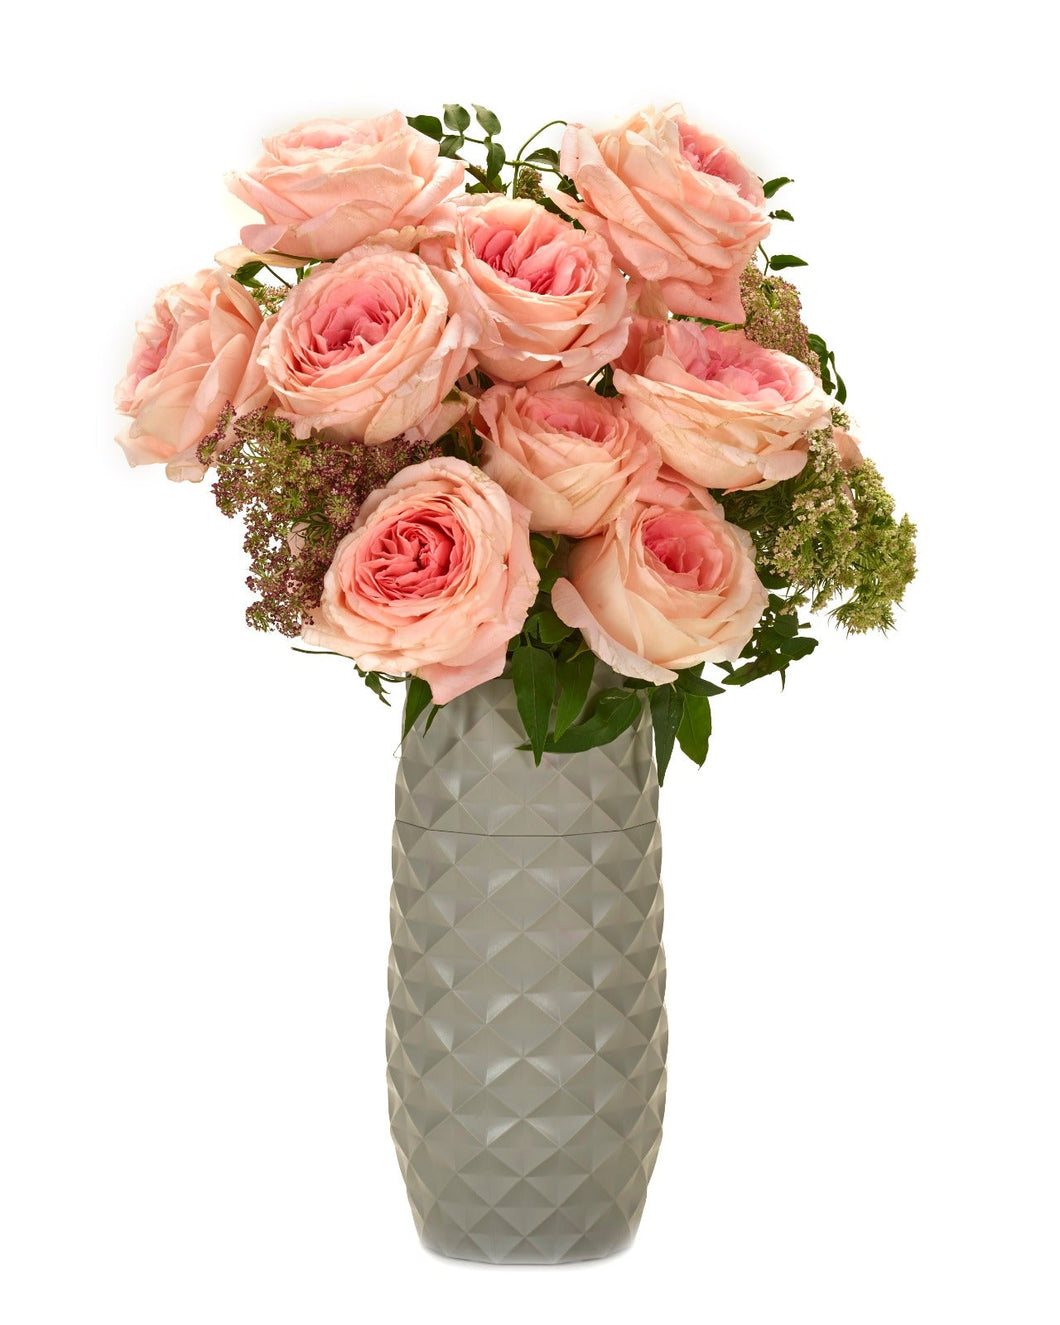 The Amaranth Vase in Cool Grey - 10